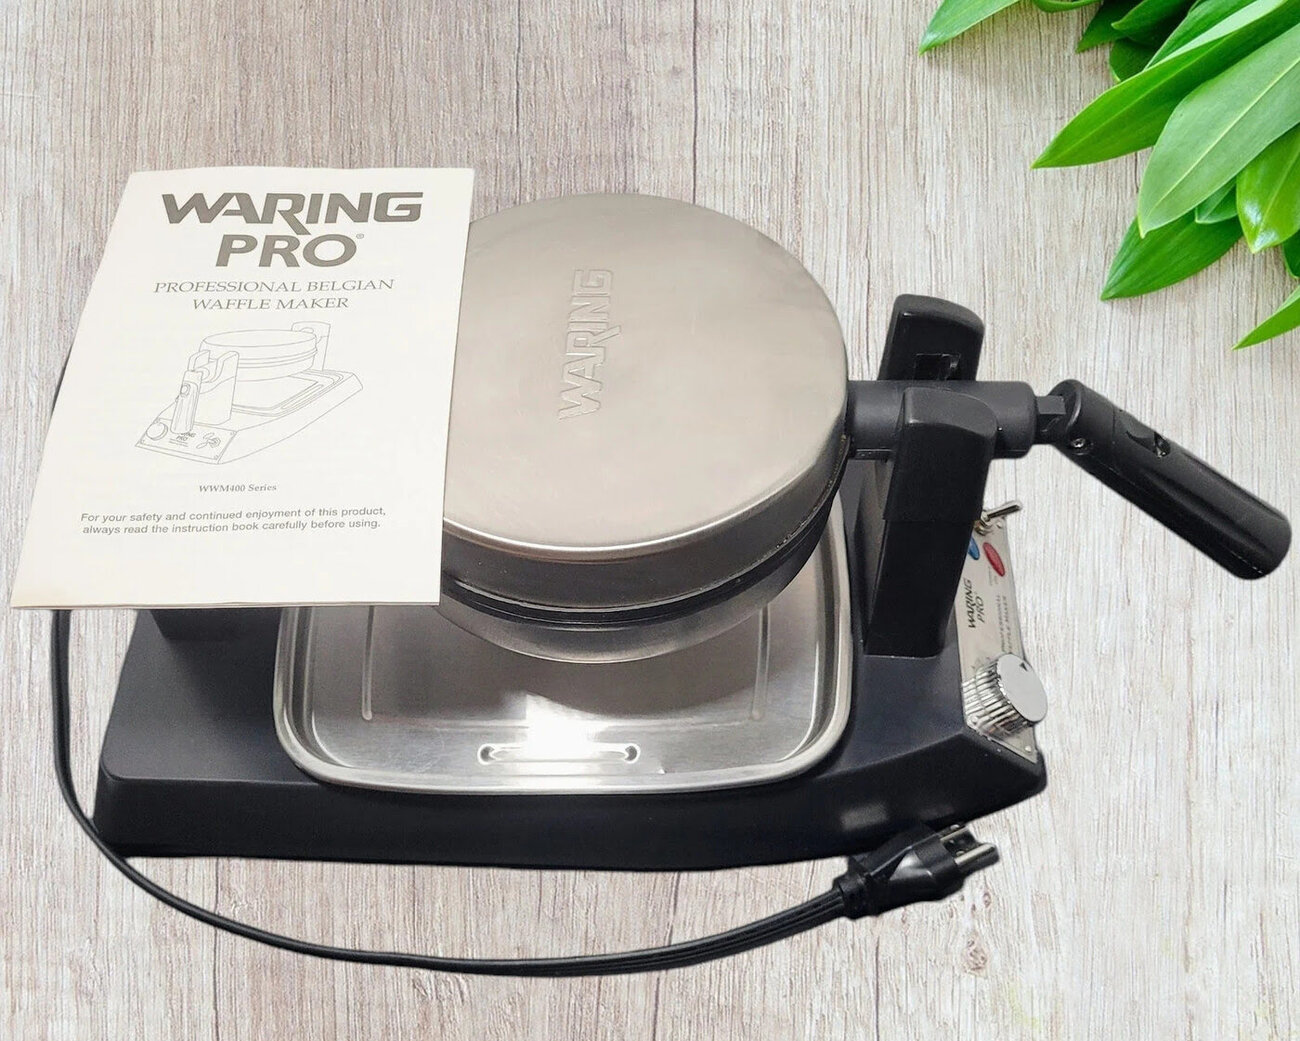 How To Use A Waring Waffle Iron